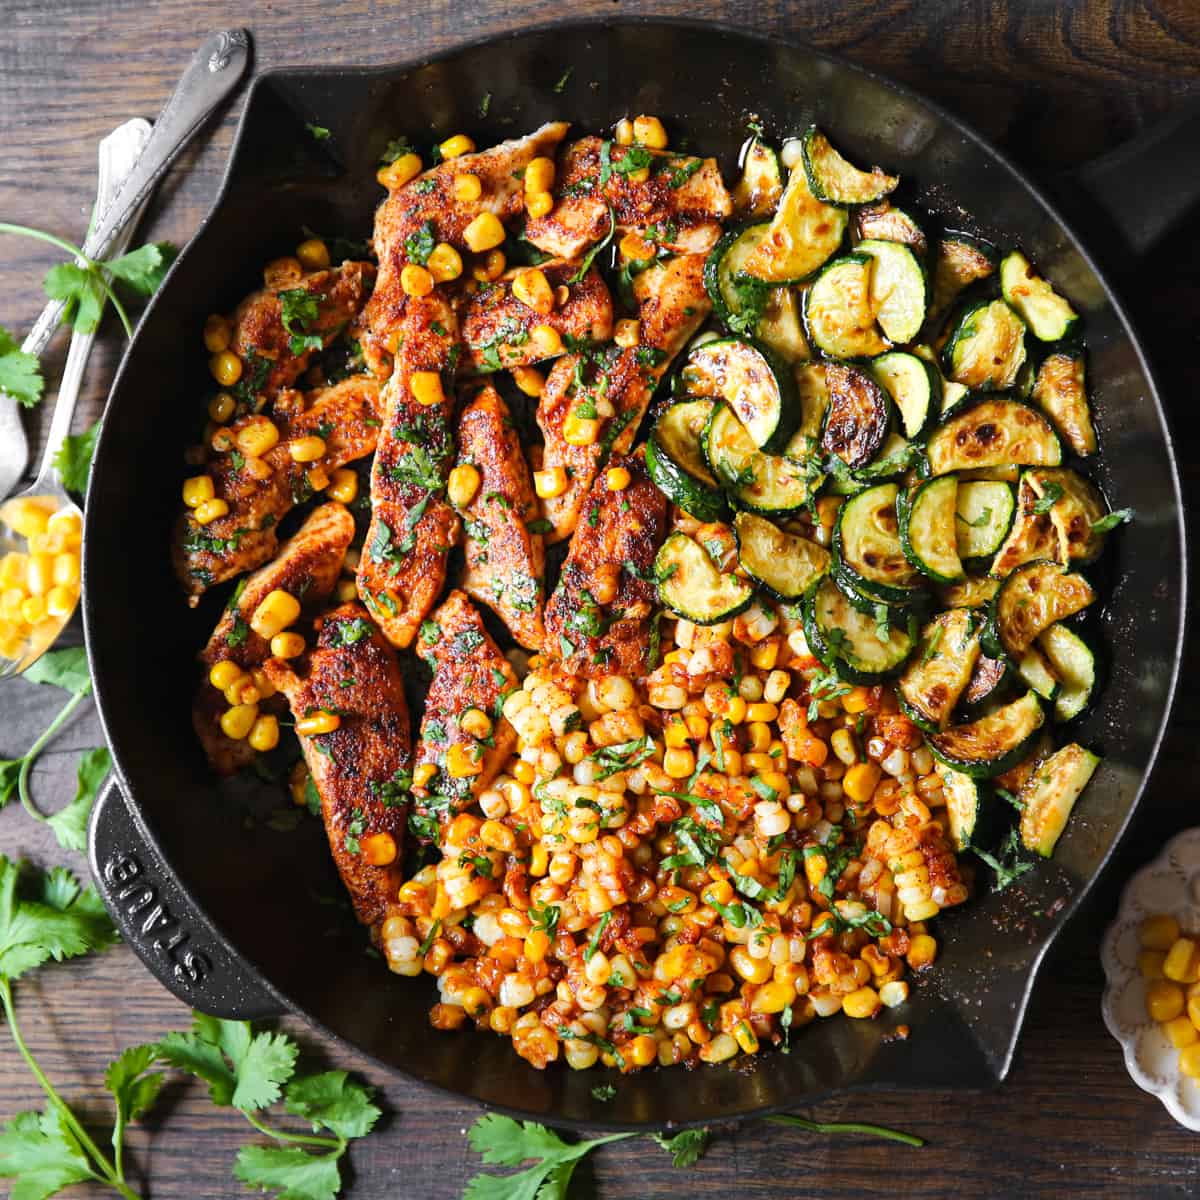 Garlic Butter Chicken with Zucchini and Corn in a cast iron skillet